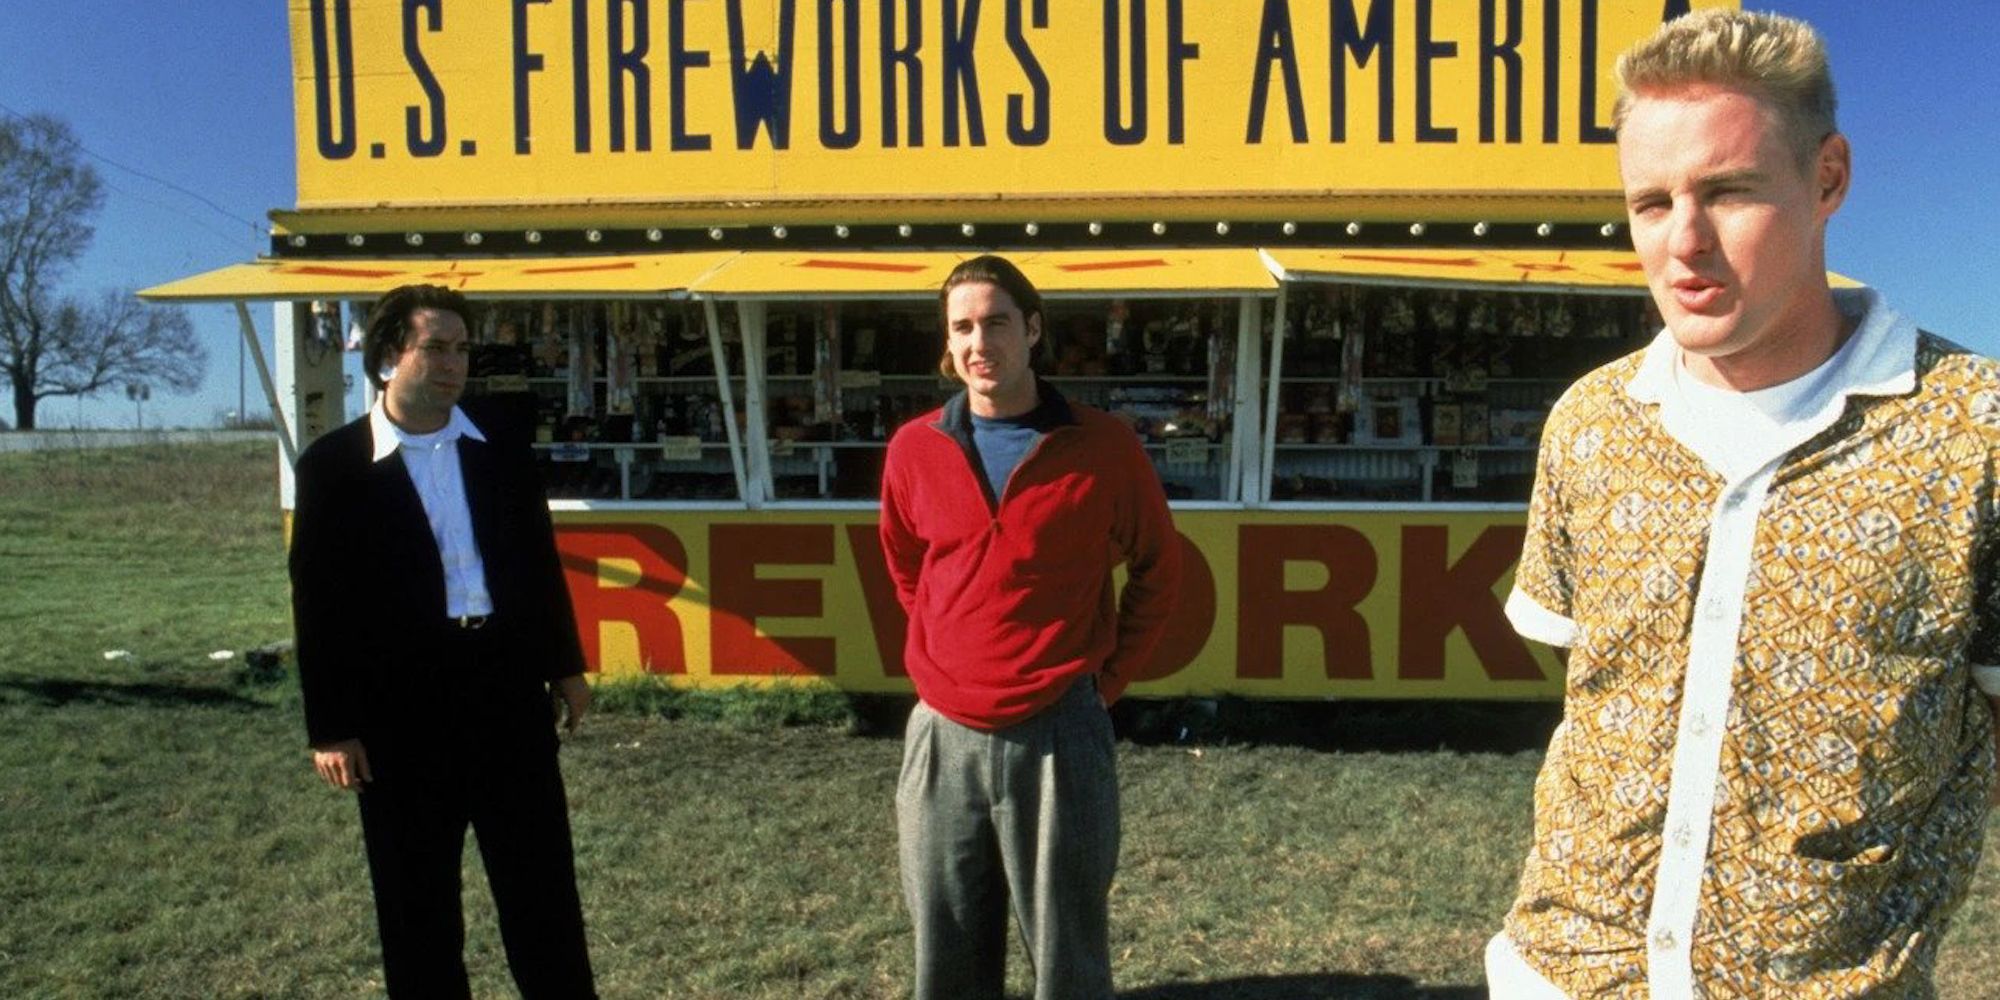 Dignan and Anthony standing in an open field in Bottle Rocket.